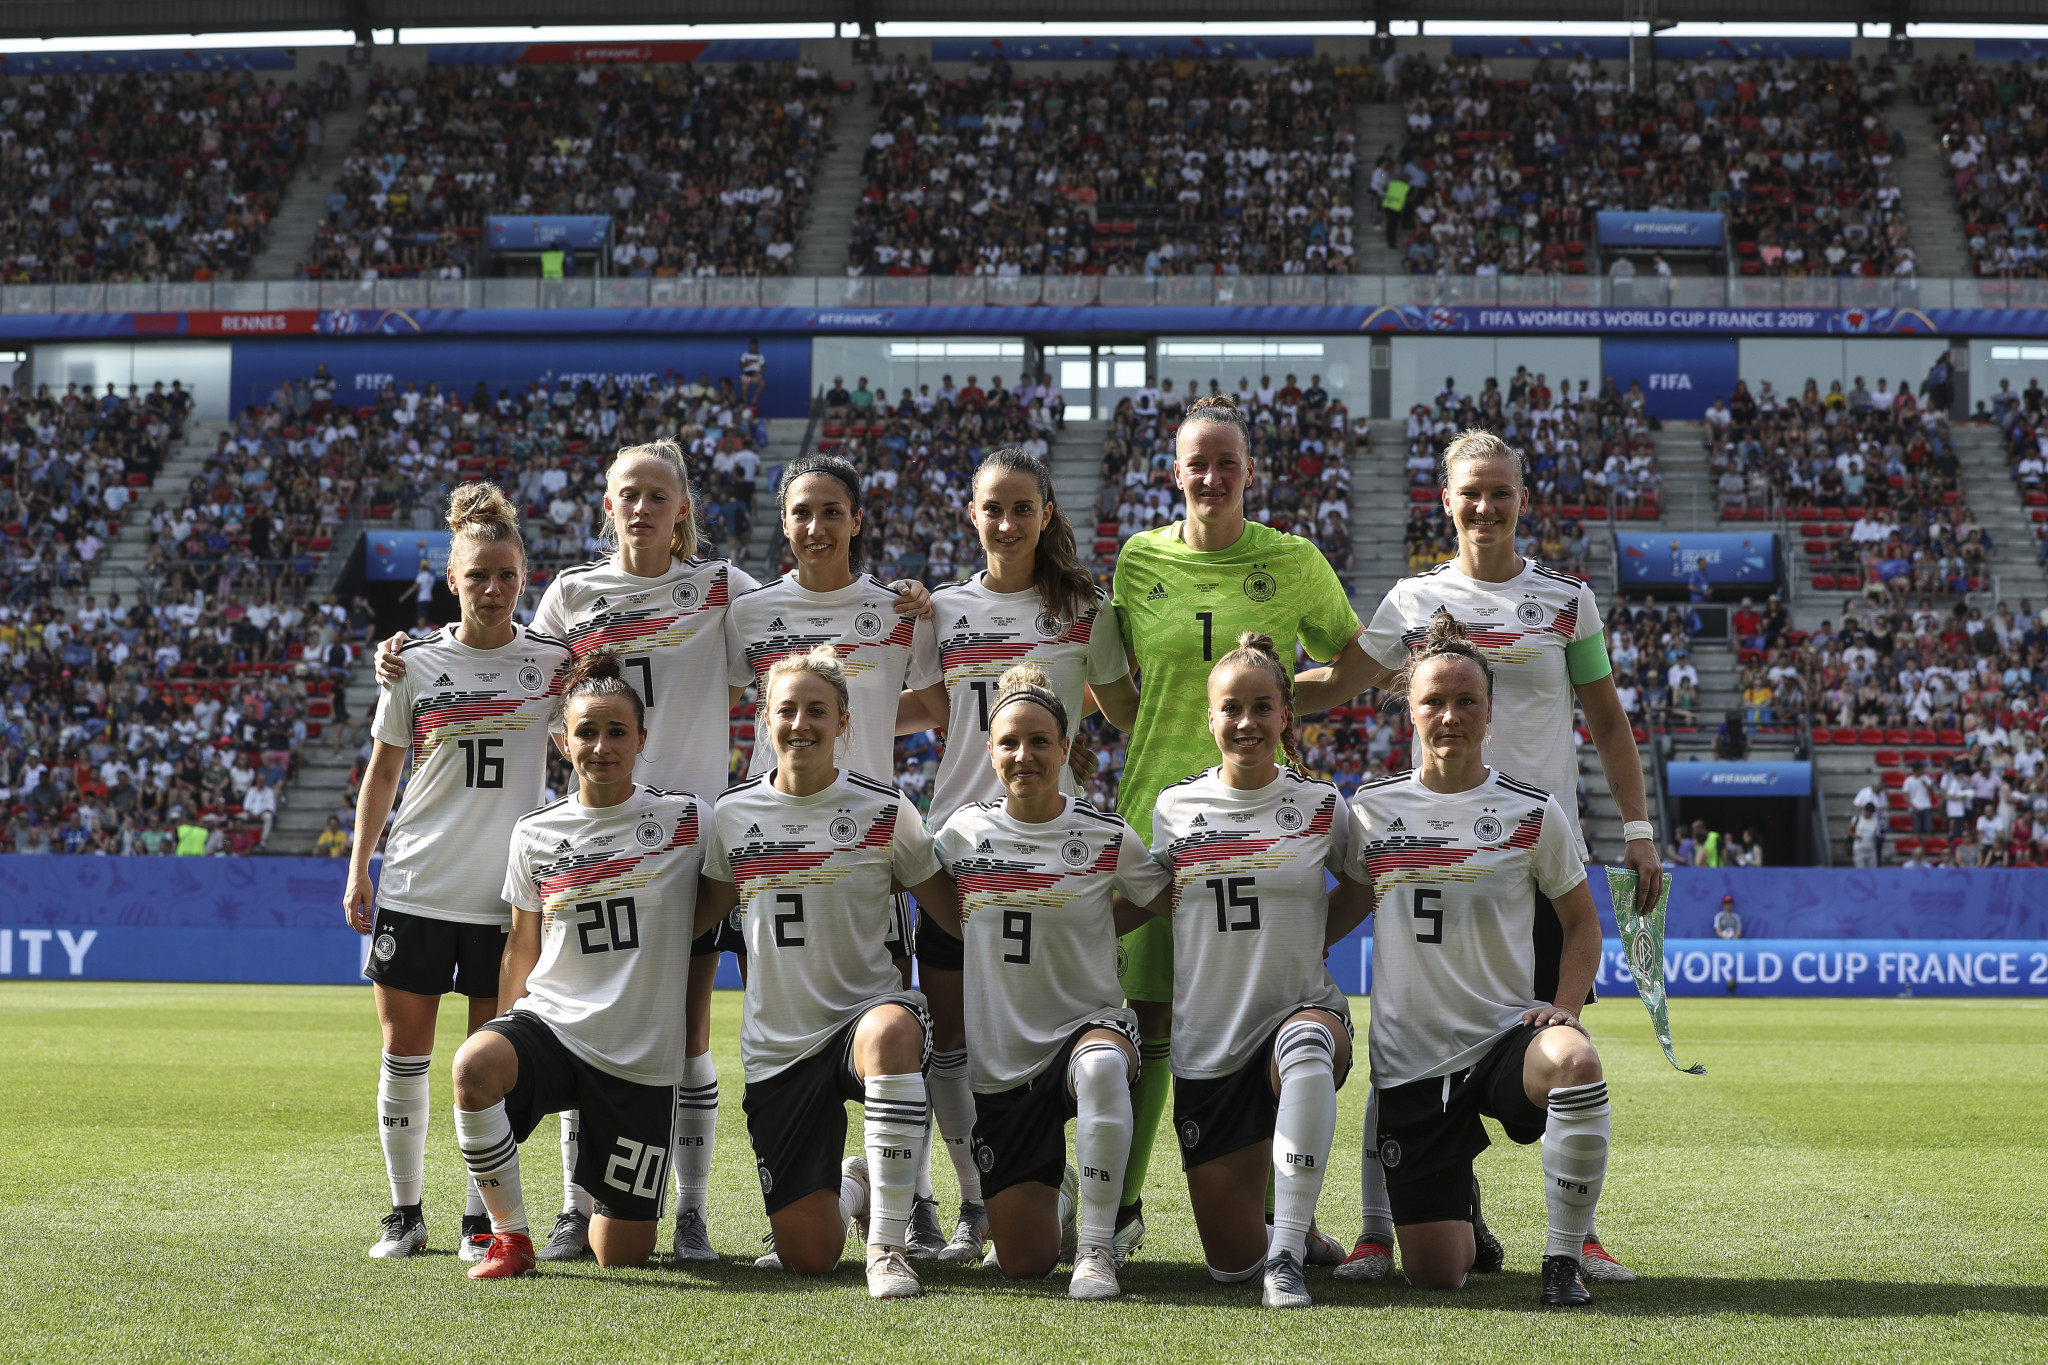 Belgium, Germany and the Netherlands announce joint bid to co-host 2027 FIFA Women's World Cup